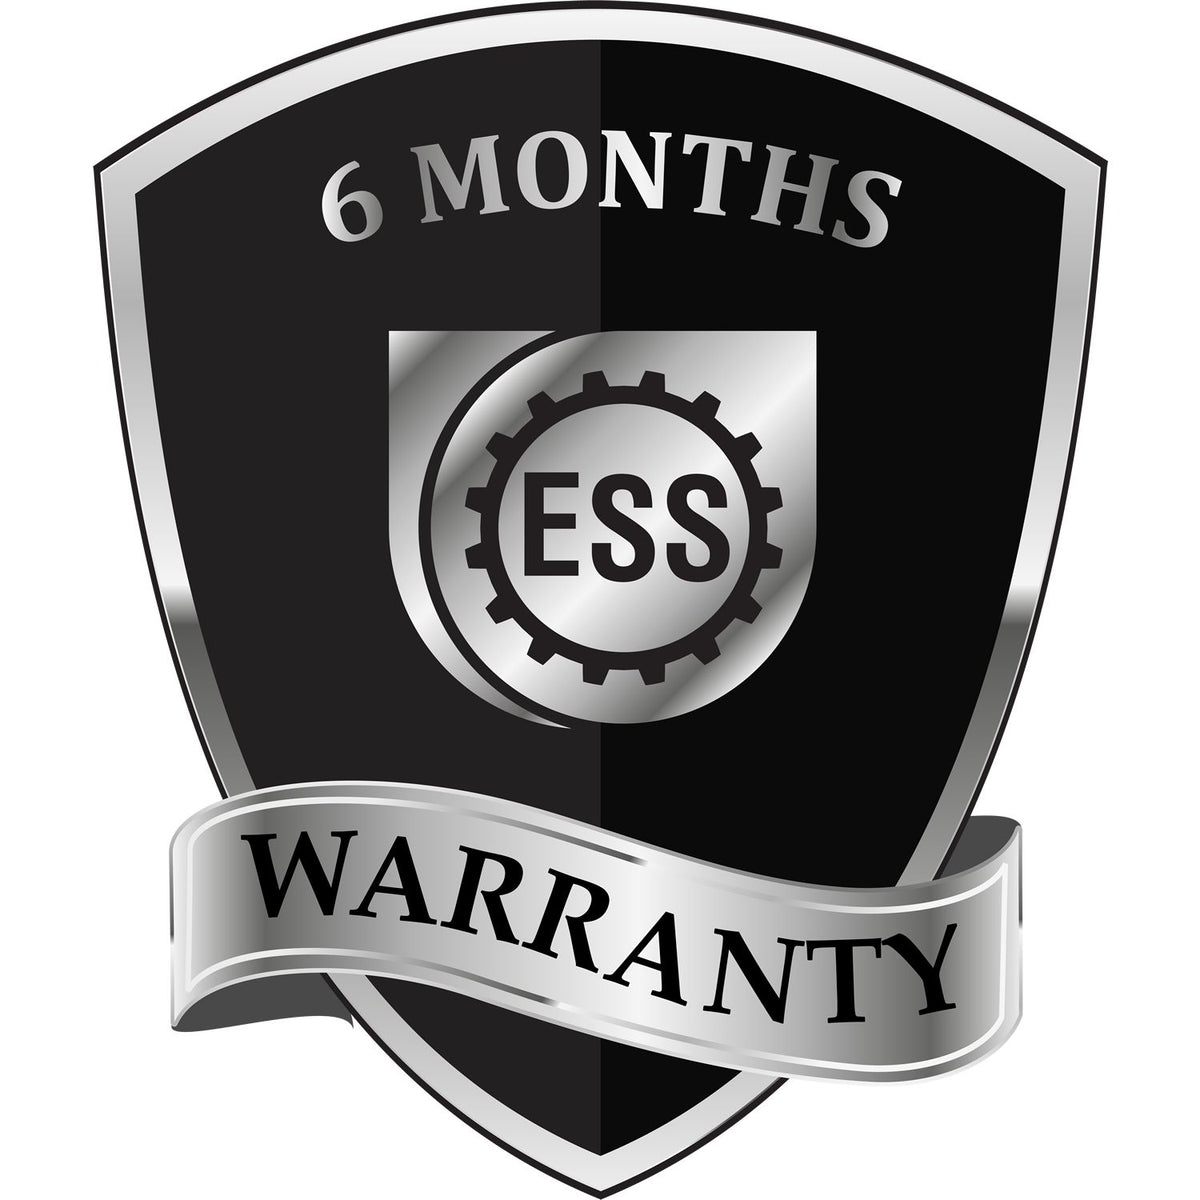 A black and silver badge or emblem showing warranty information for the North Dakota Professional Geologist Seal Stamp